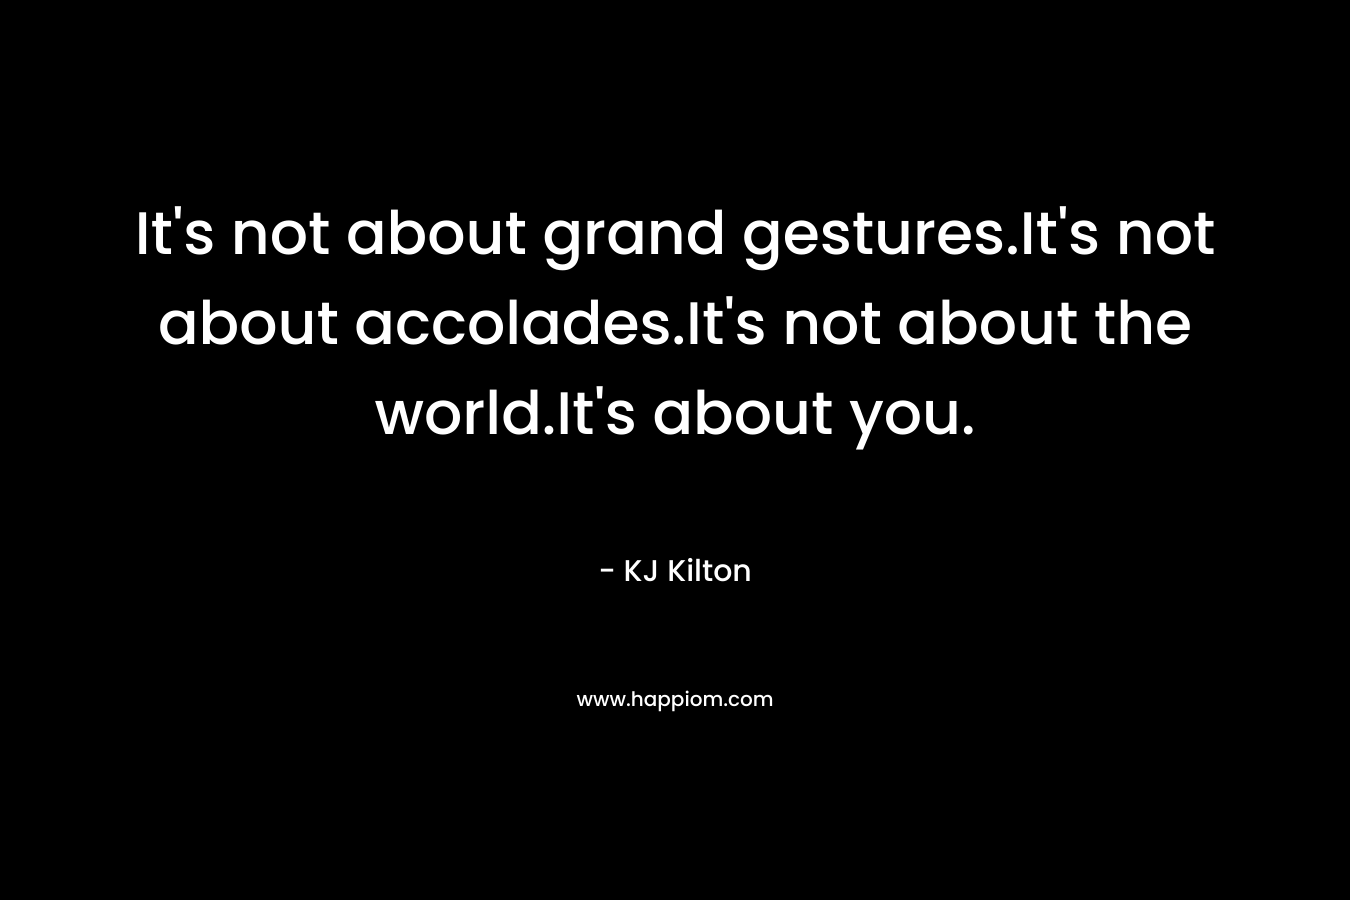 It’s not about grand gestures.It’s not about accolades.It’s not about the world.It’s about you. – KJ Kilton